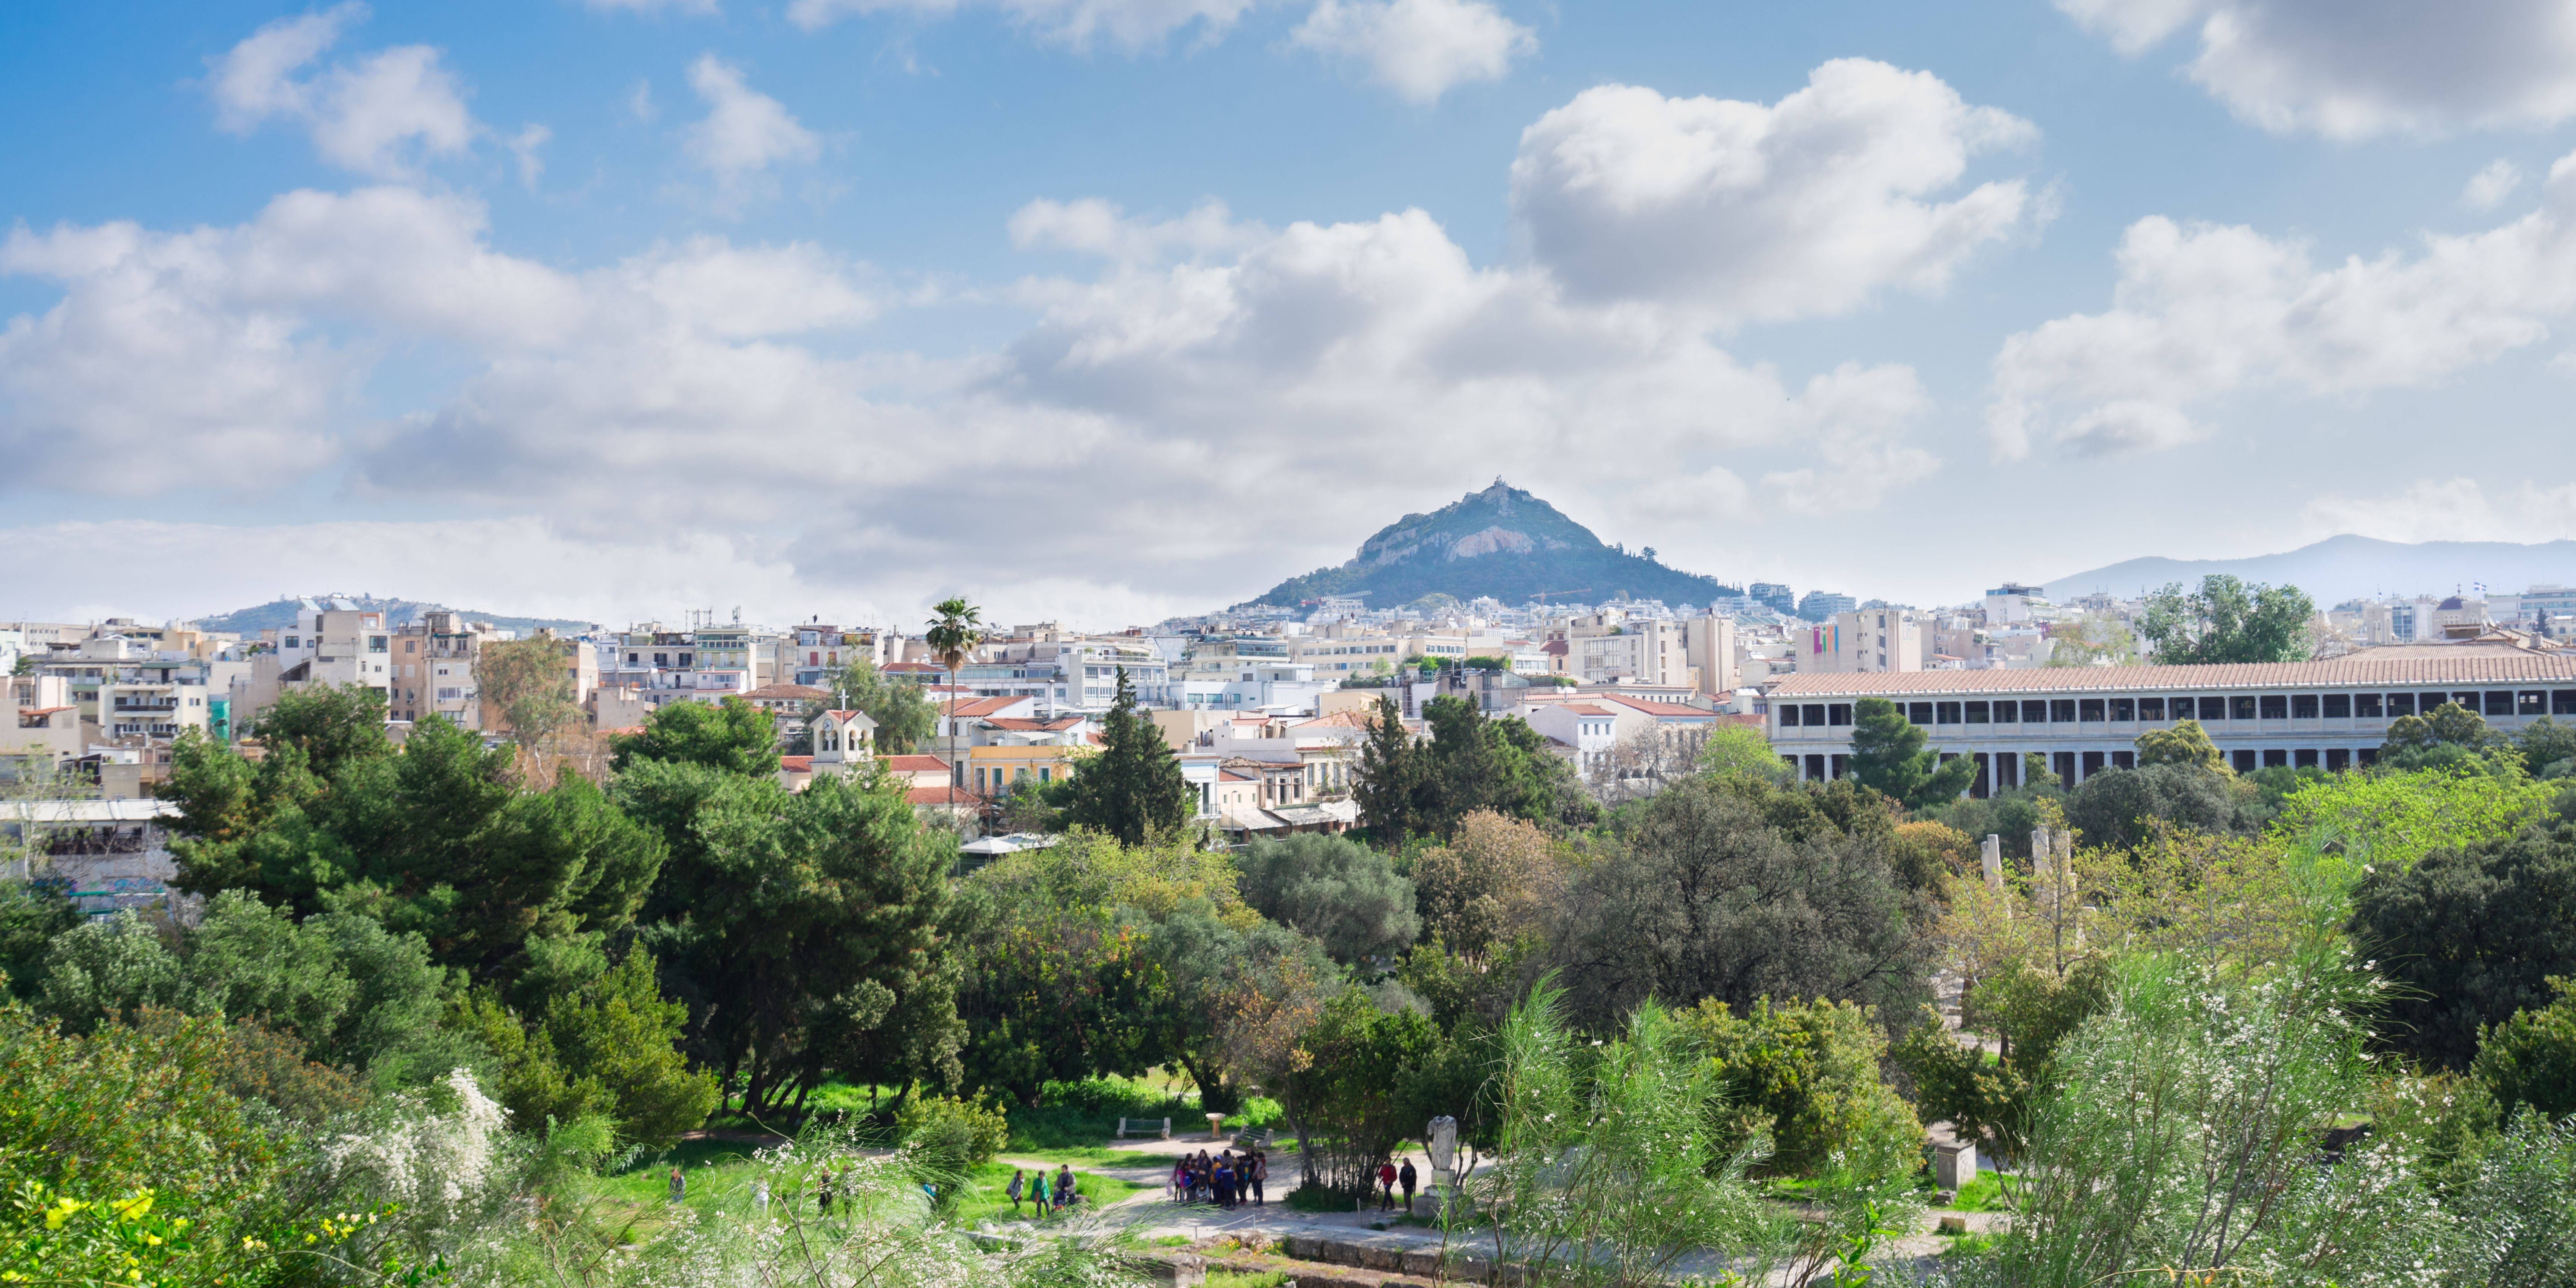 View of Lycabettus Hill overlooking the cityscape and greenery in Athens.